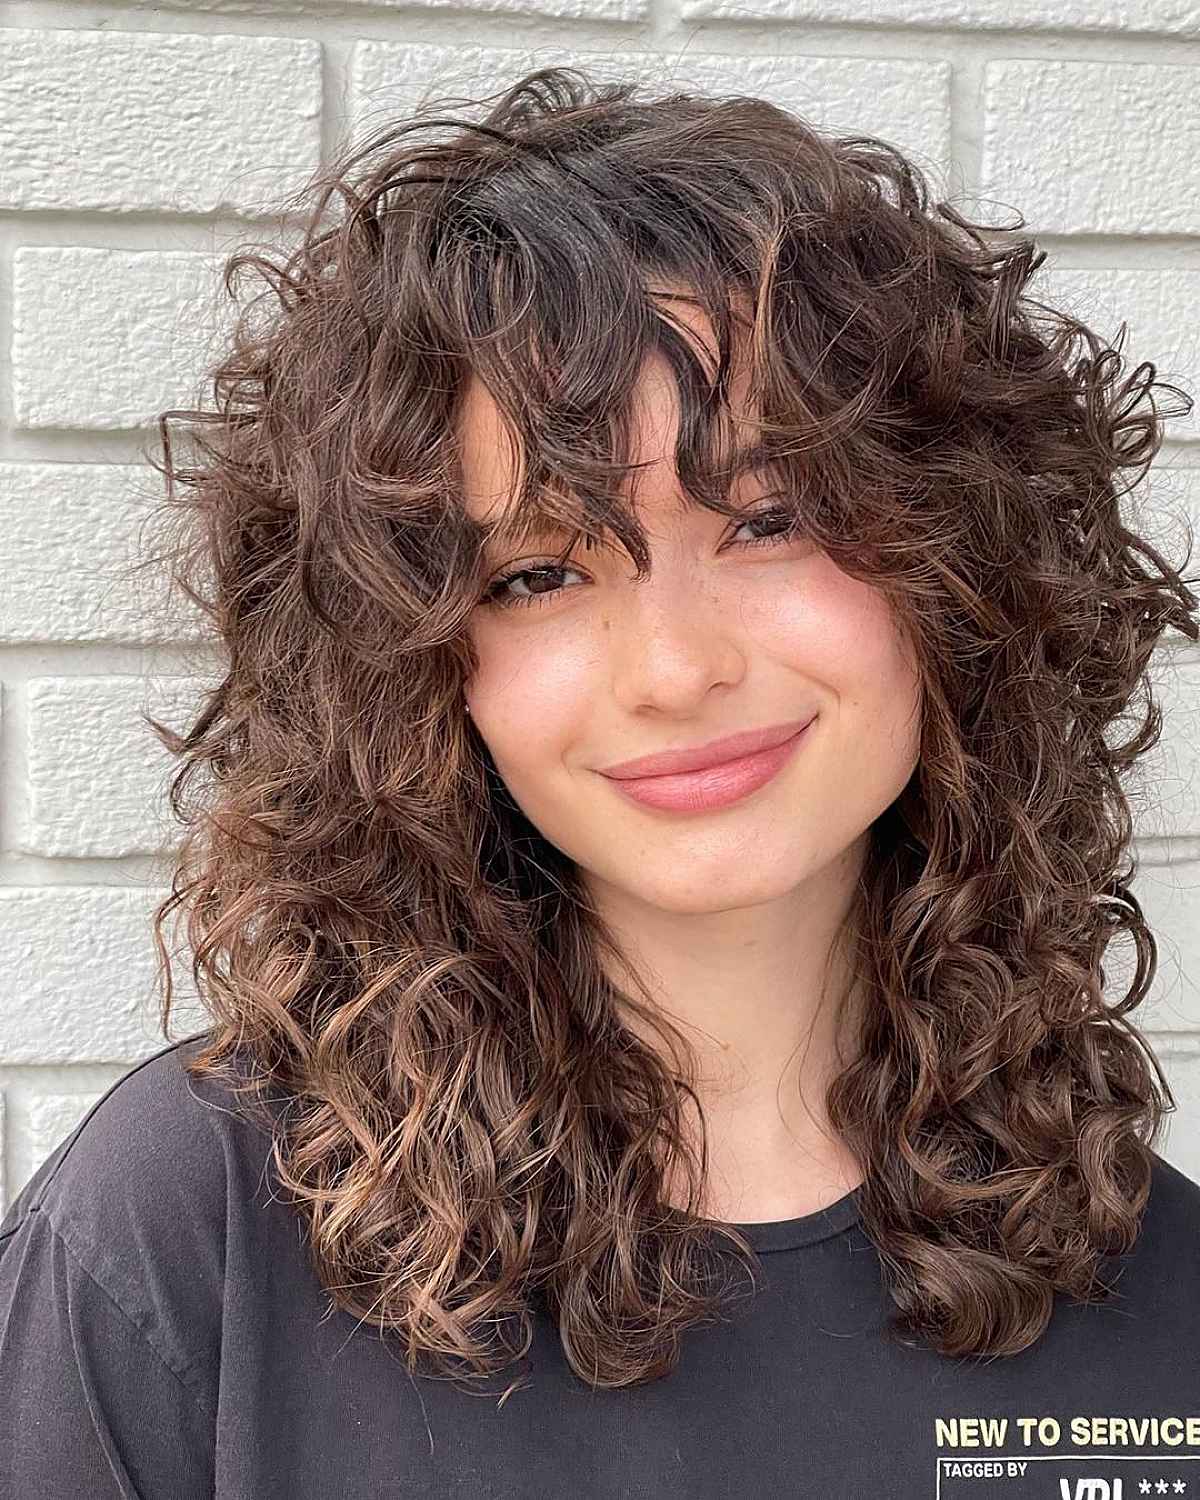 Fringe for women with curly hair and a square face